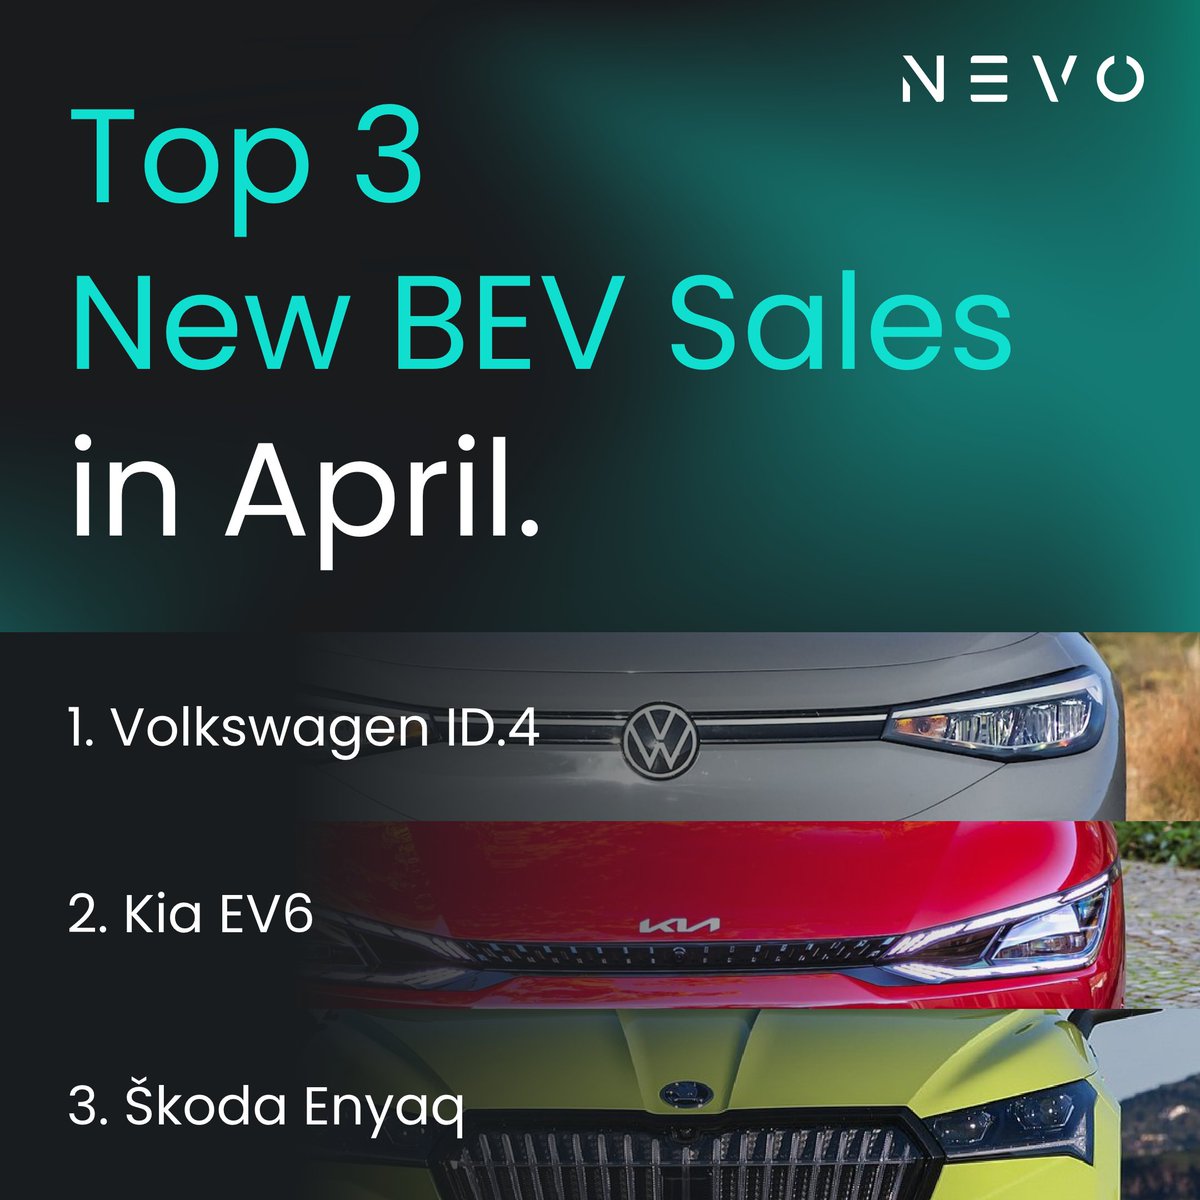 The most recent updates from @SIMI_IE on new BEV sales in April show: 1. Volkswagen ID.4 2. Kia EV6 3. Skoda Enyaq Browse and compare these models, and book your test drive today on Nevo at the link: nevo.ie/vehicles-compa… @VolkswagenIE @kia_ireland @SkodaIRL